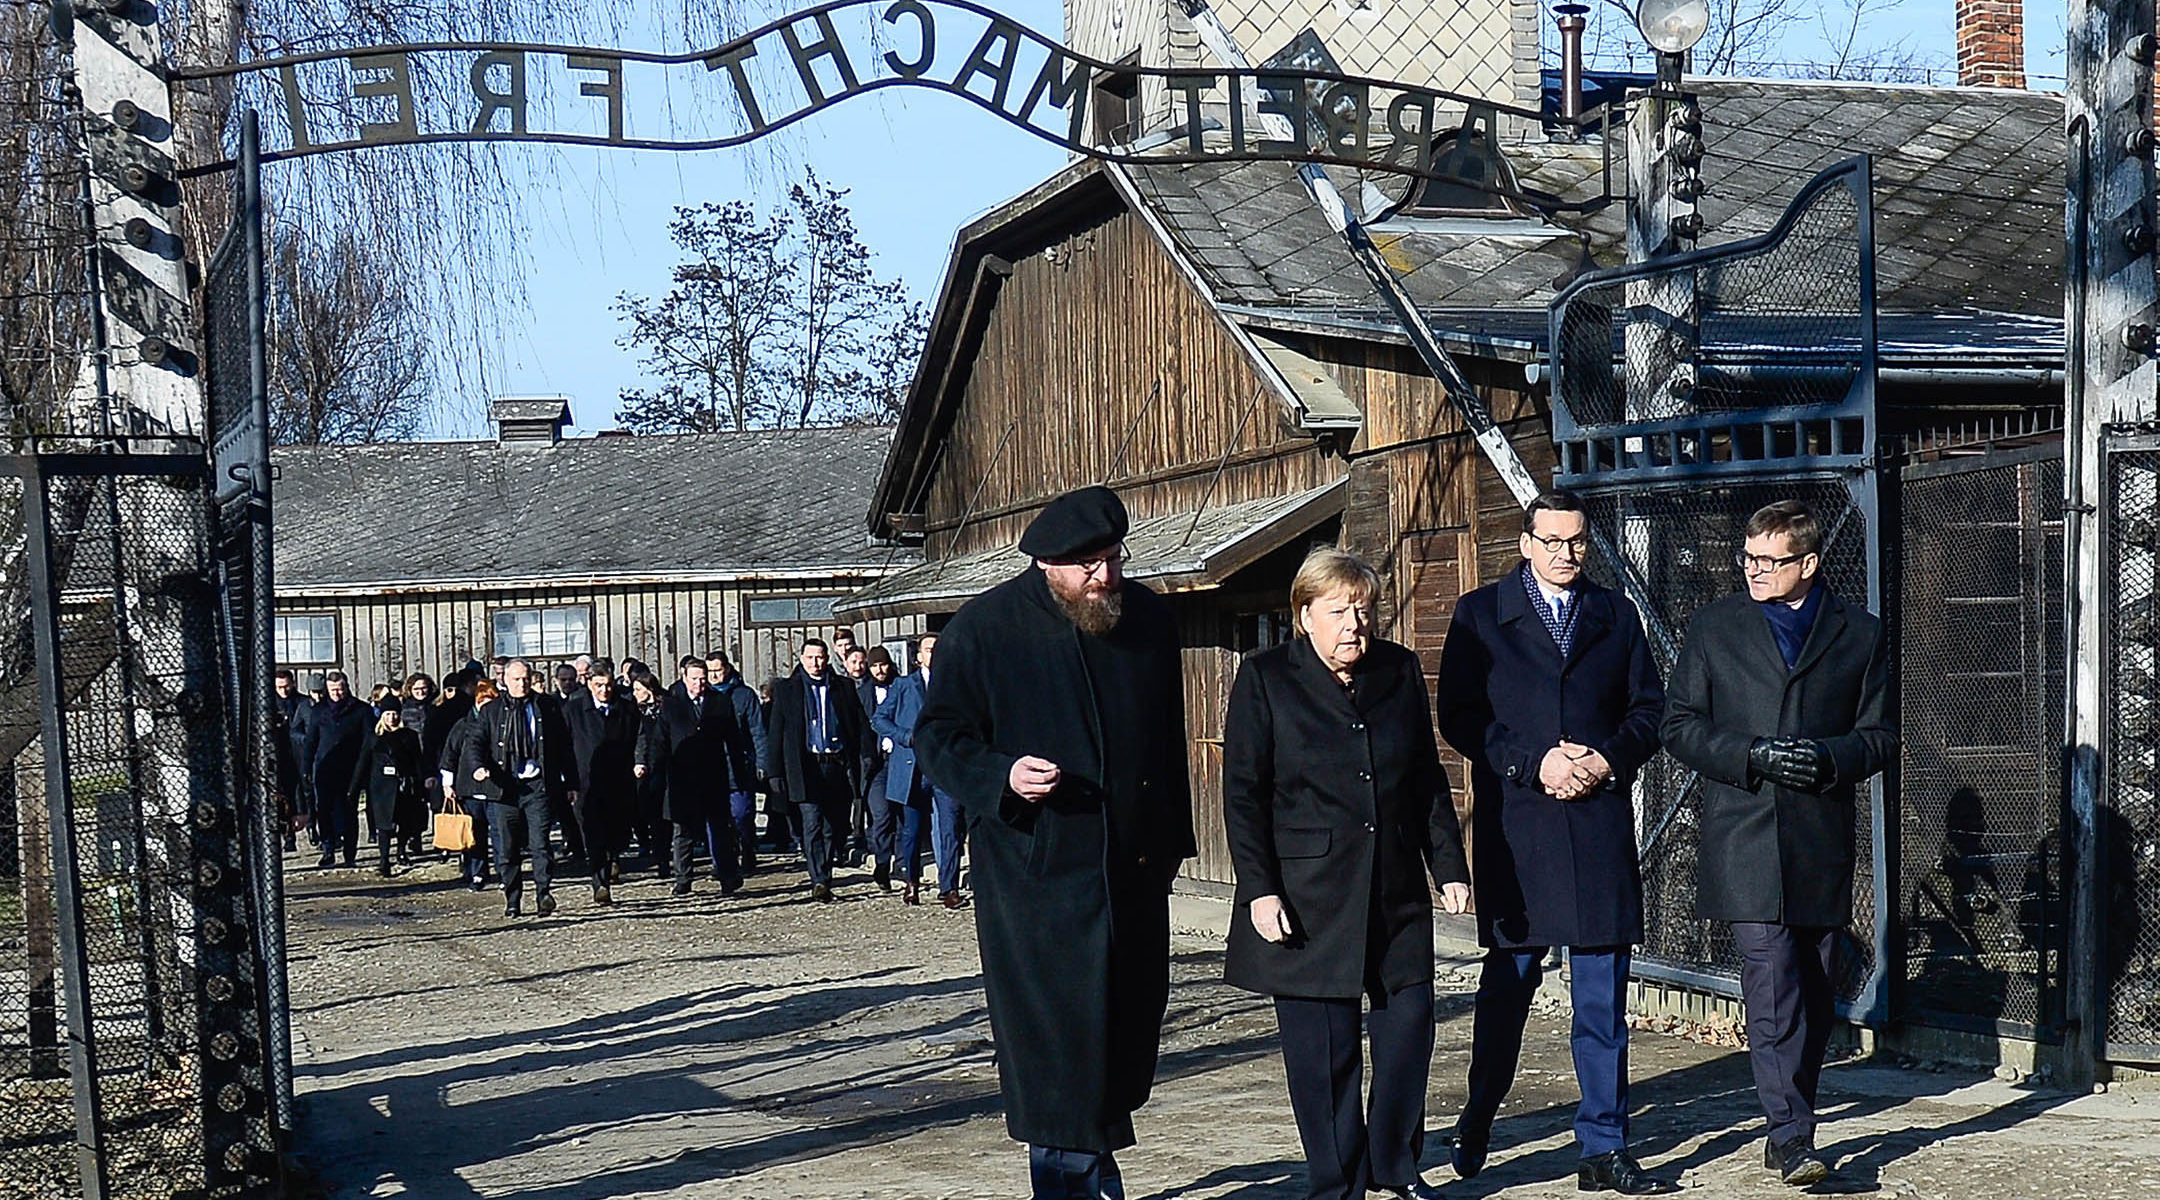 German Chancellor Angela Merkel and Poland's Prime Minister, Mateusz Morawiecki, second from left, receiving a tour by employees of the former Auschwitz Nazi concentration camp near Krakow, Poland on Dec. 6, 2019. (Omar Marques/Getty Images)